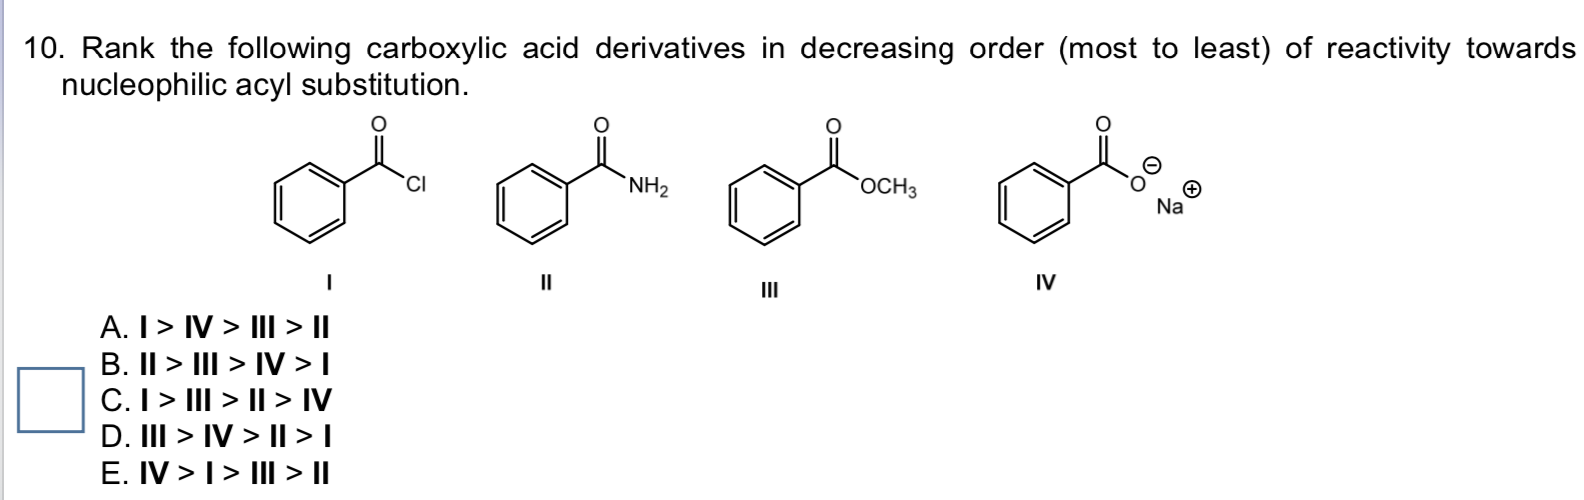 10. Rank the following carboxylic acid derivatives in decreasing order (most to least) of reactivity towards
nucleophilic acyl substitution.
NH2
гоСНз
Na
II
IV
II
A. I> IV > III > ||
B. II > III > IV > |
C. I> III > || > IV
D. III > IV > ||>I
E. IV >I> III > I|
